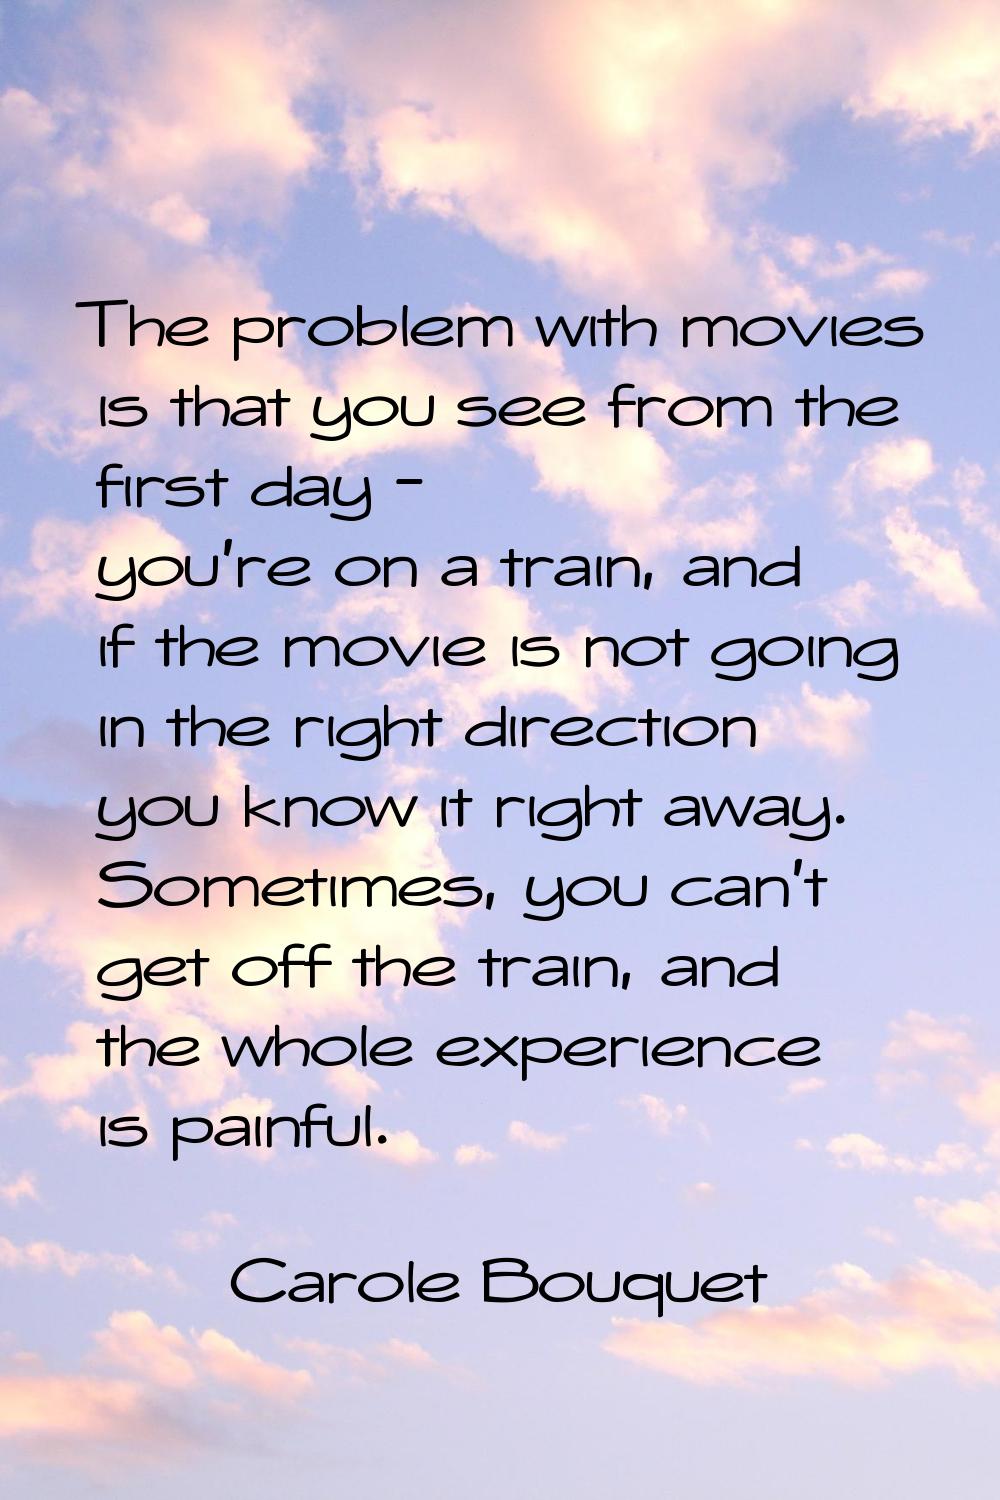 The problem with movies is that you see from the first day - you're on a train, and if the movie is